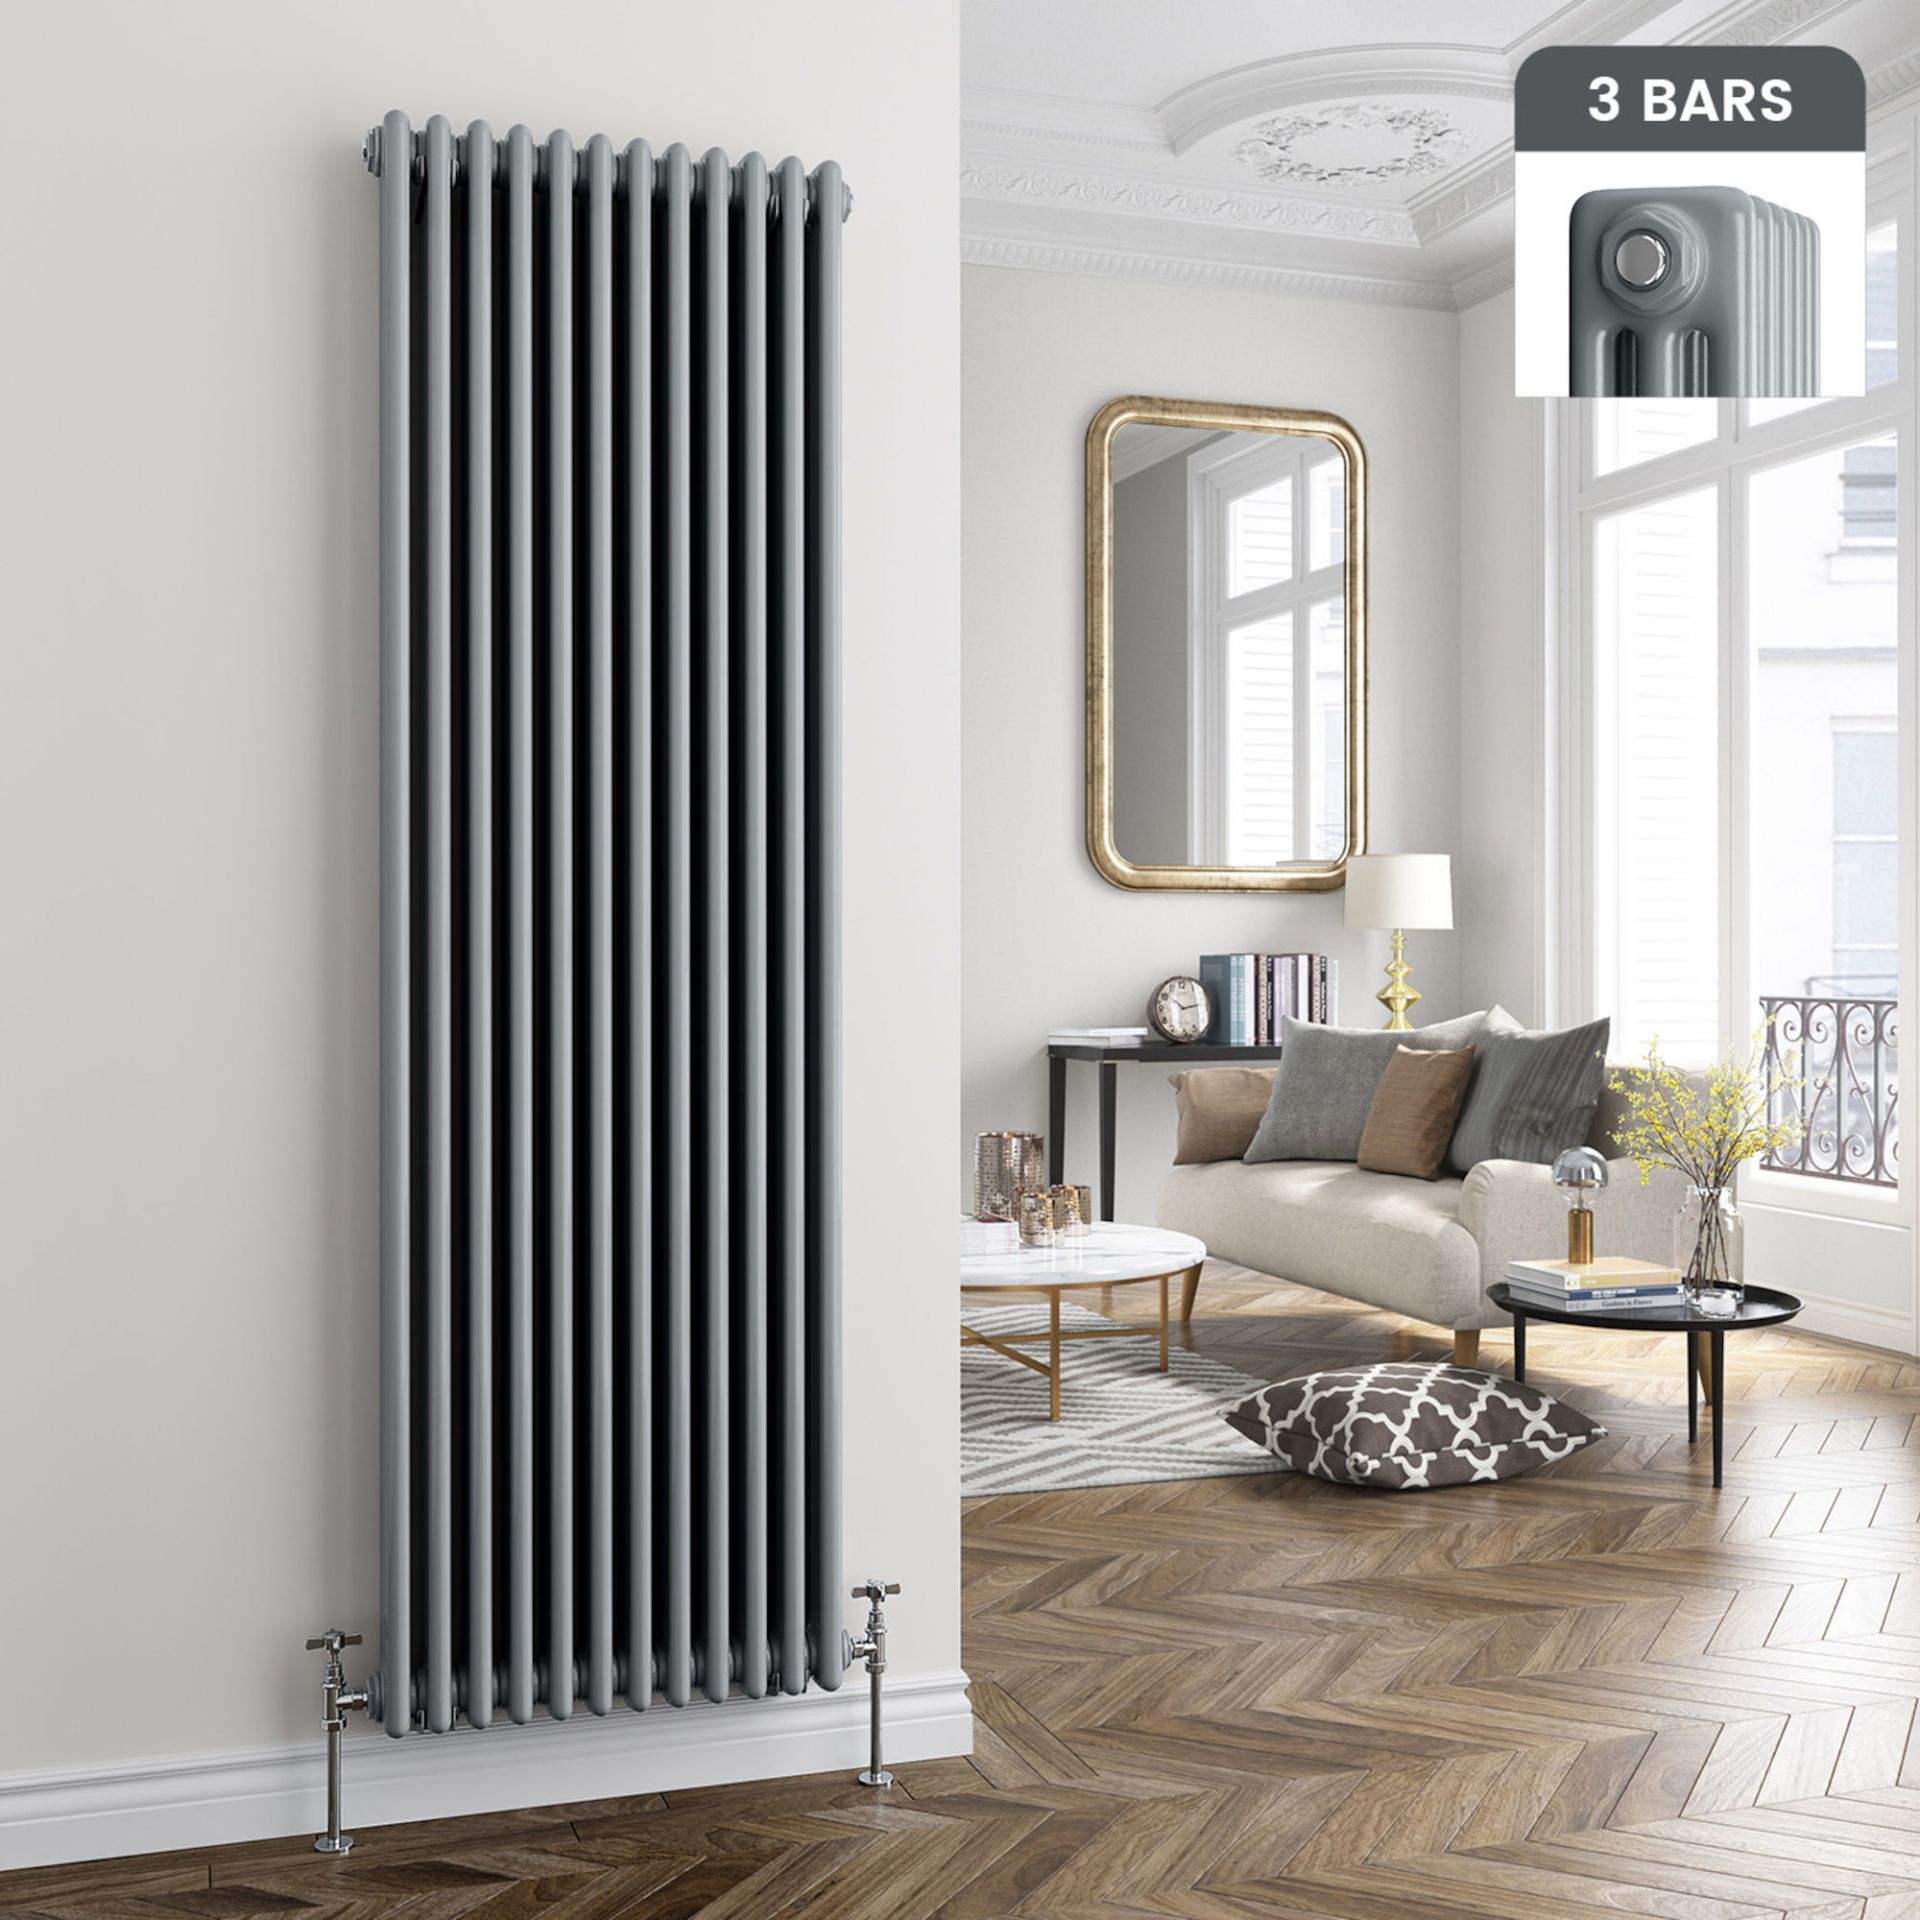 (XM74) 1800x554mm Earl Grey Triple Panel Vertical ColosseumTraditional Radiator. RRP £554.99.Made